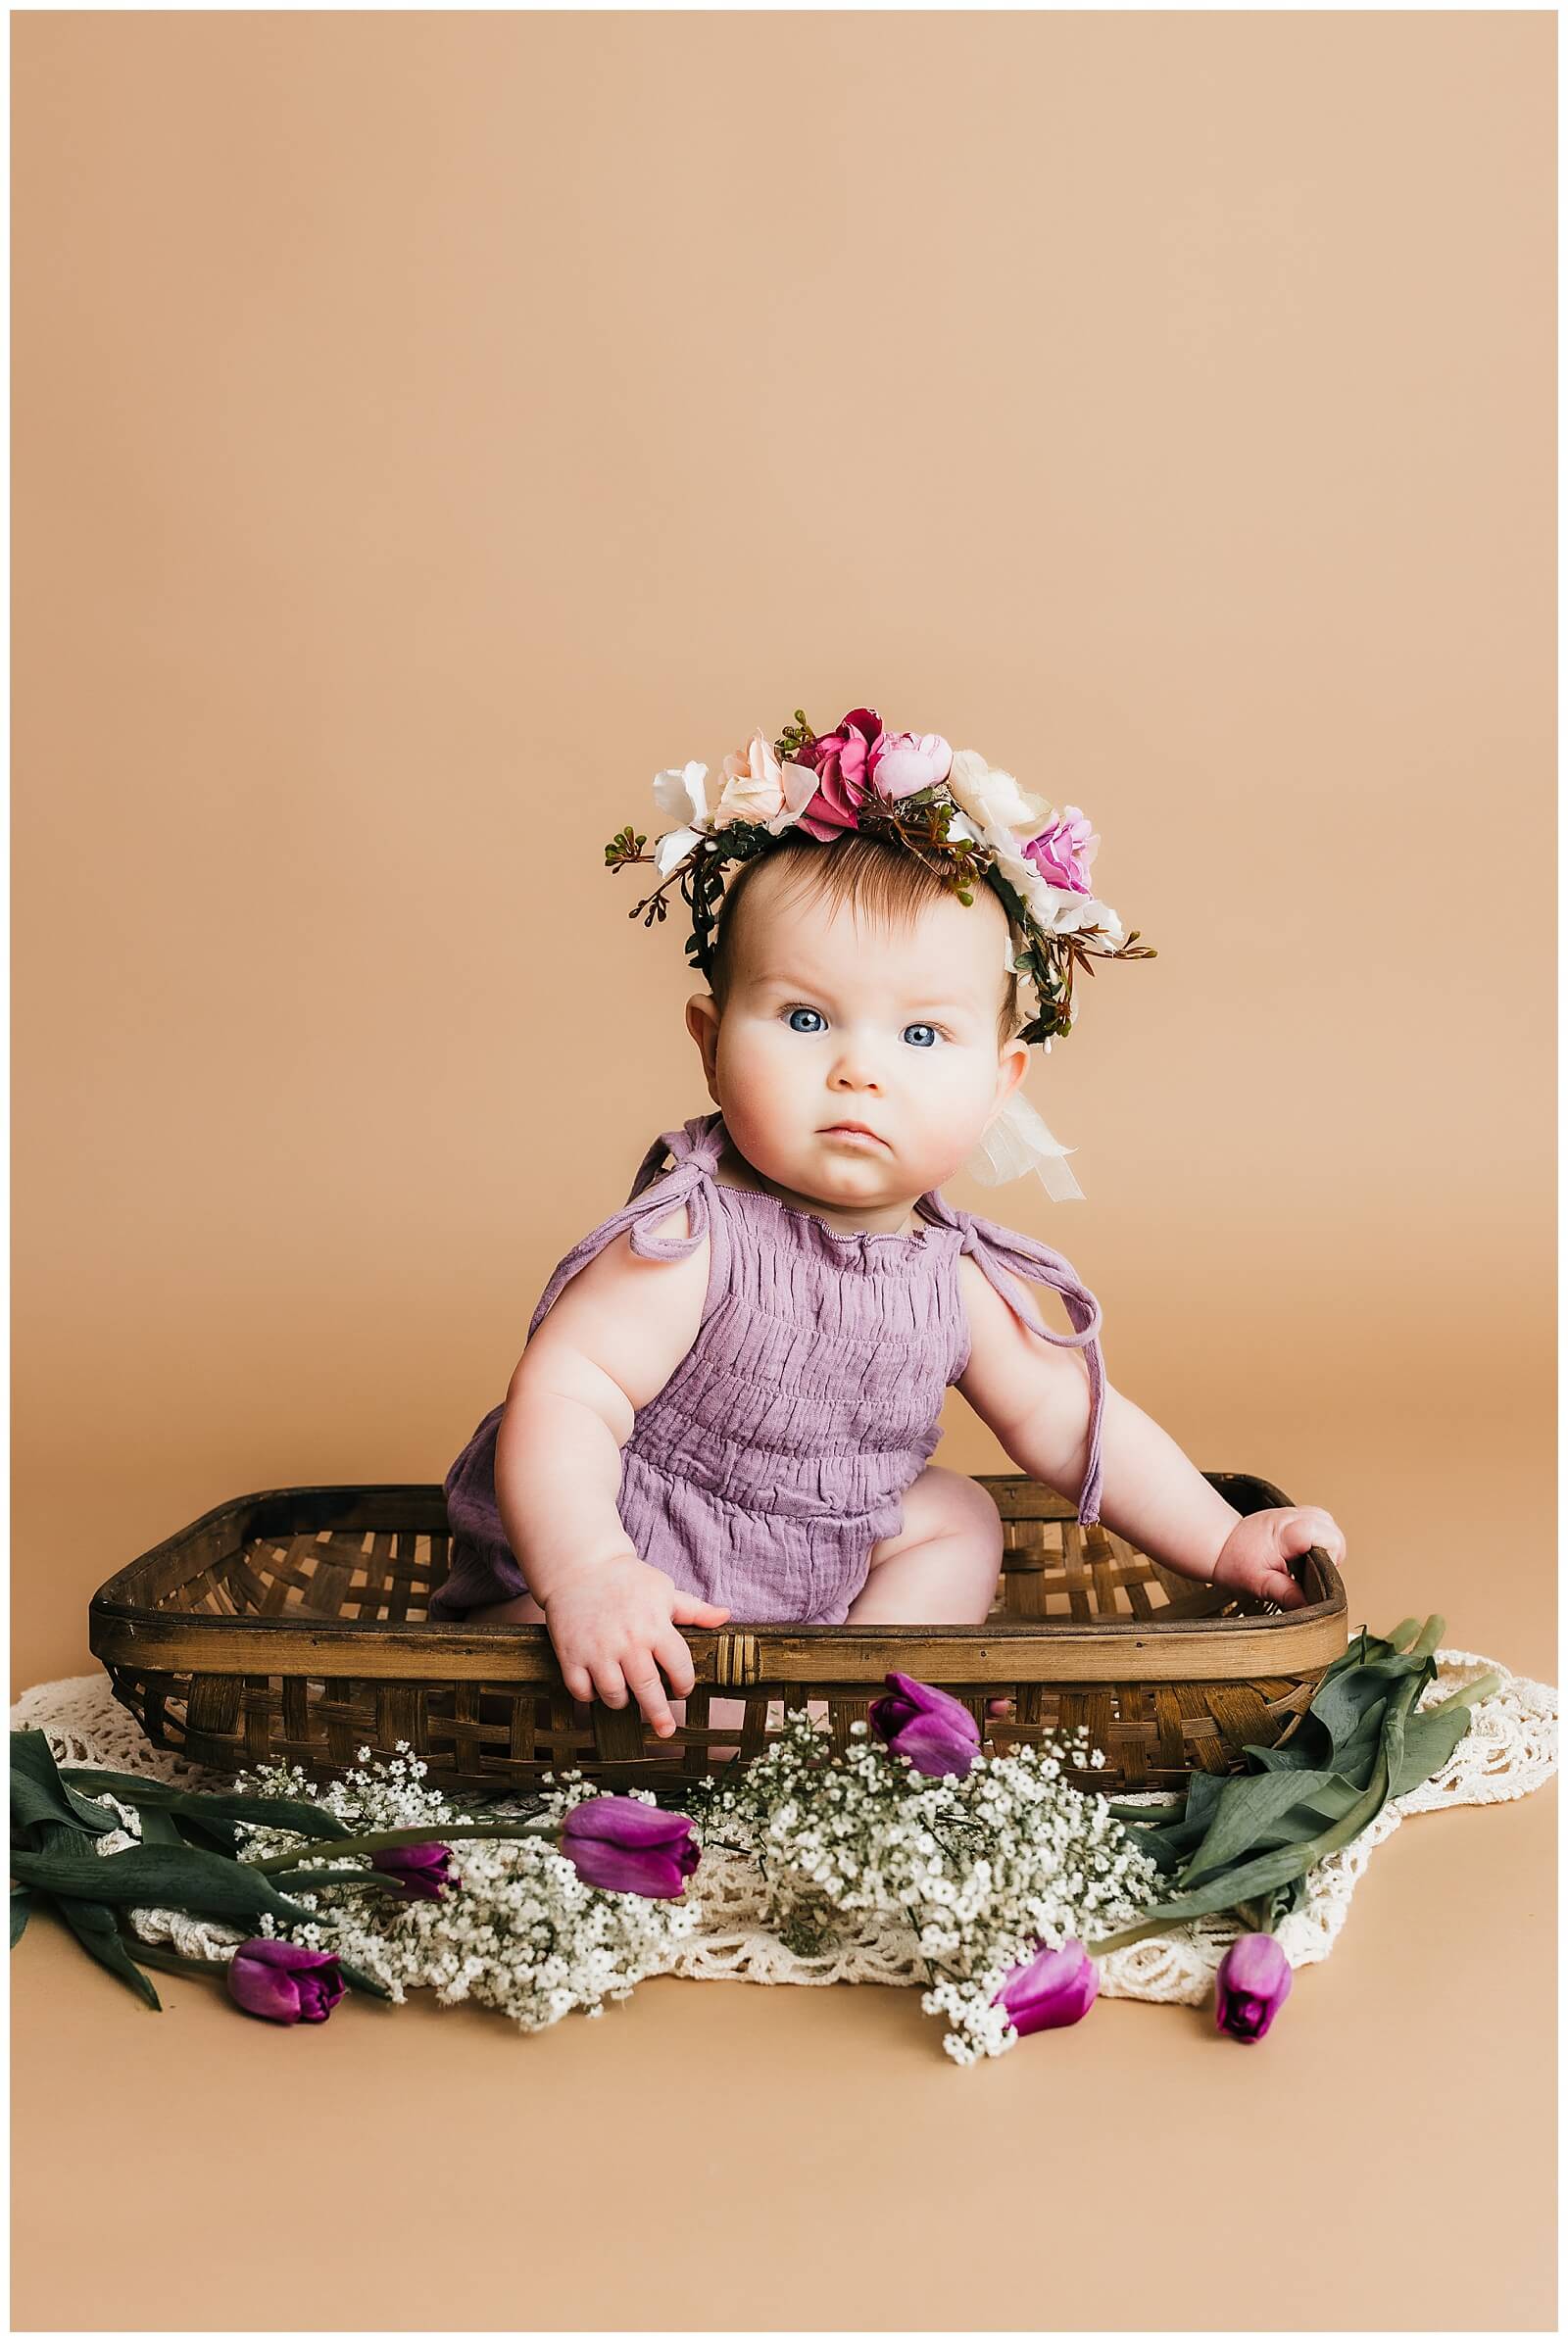 Baby girl sitting in basket with floral crown